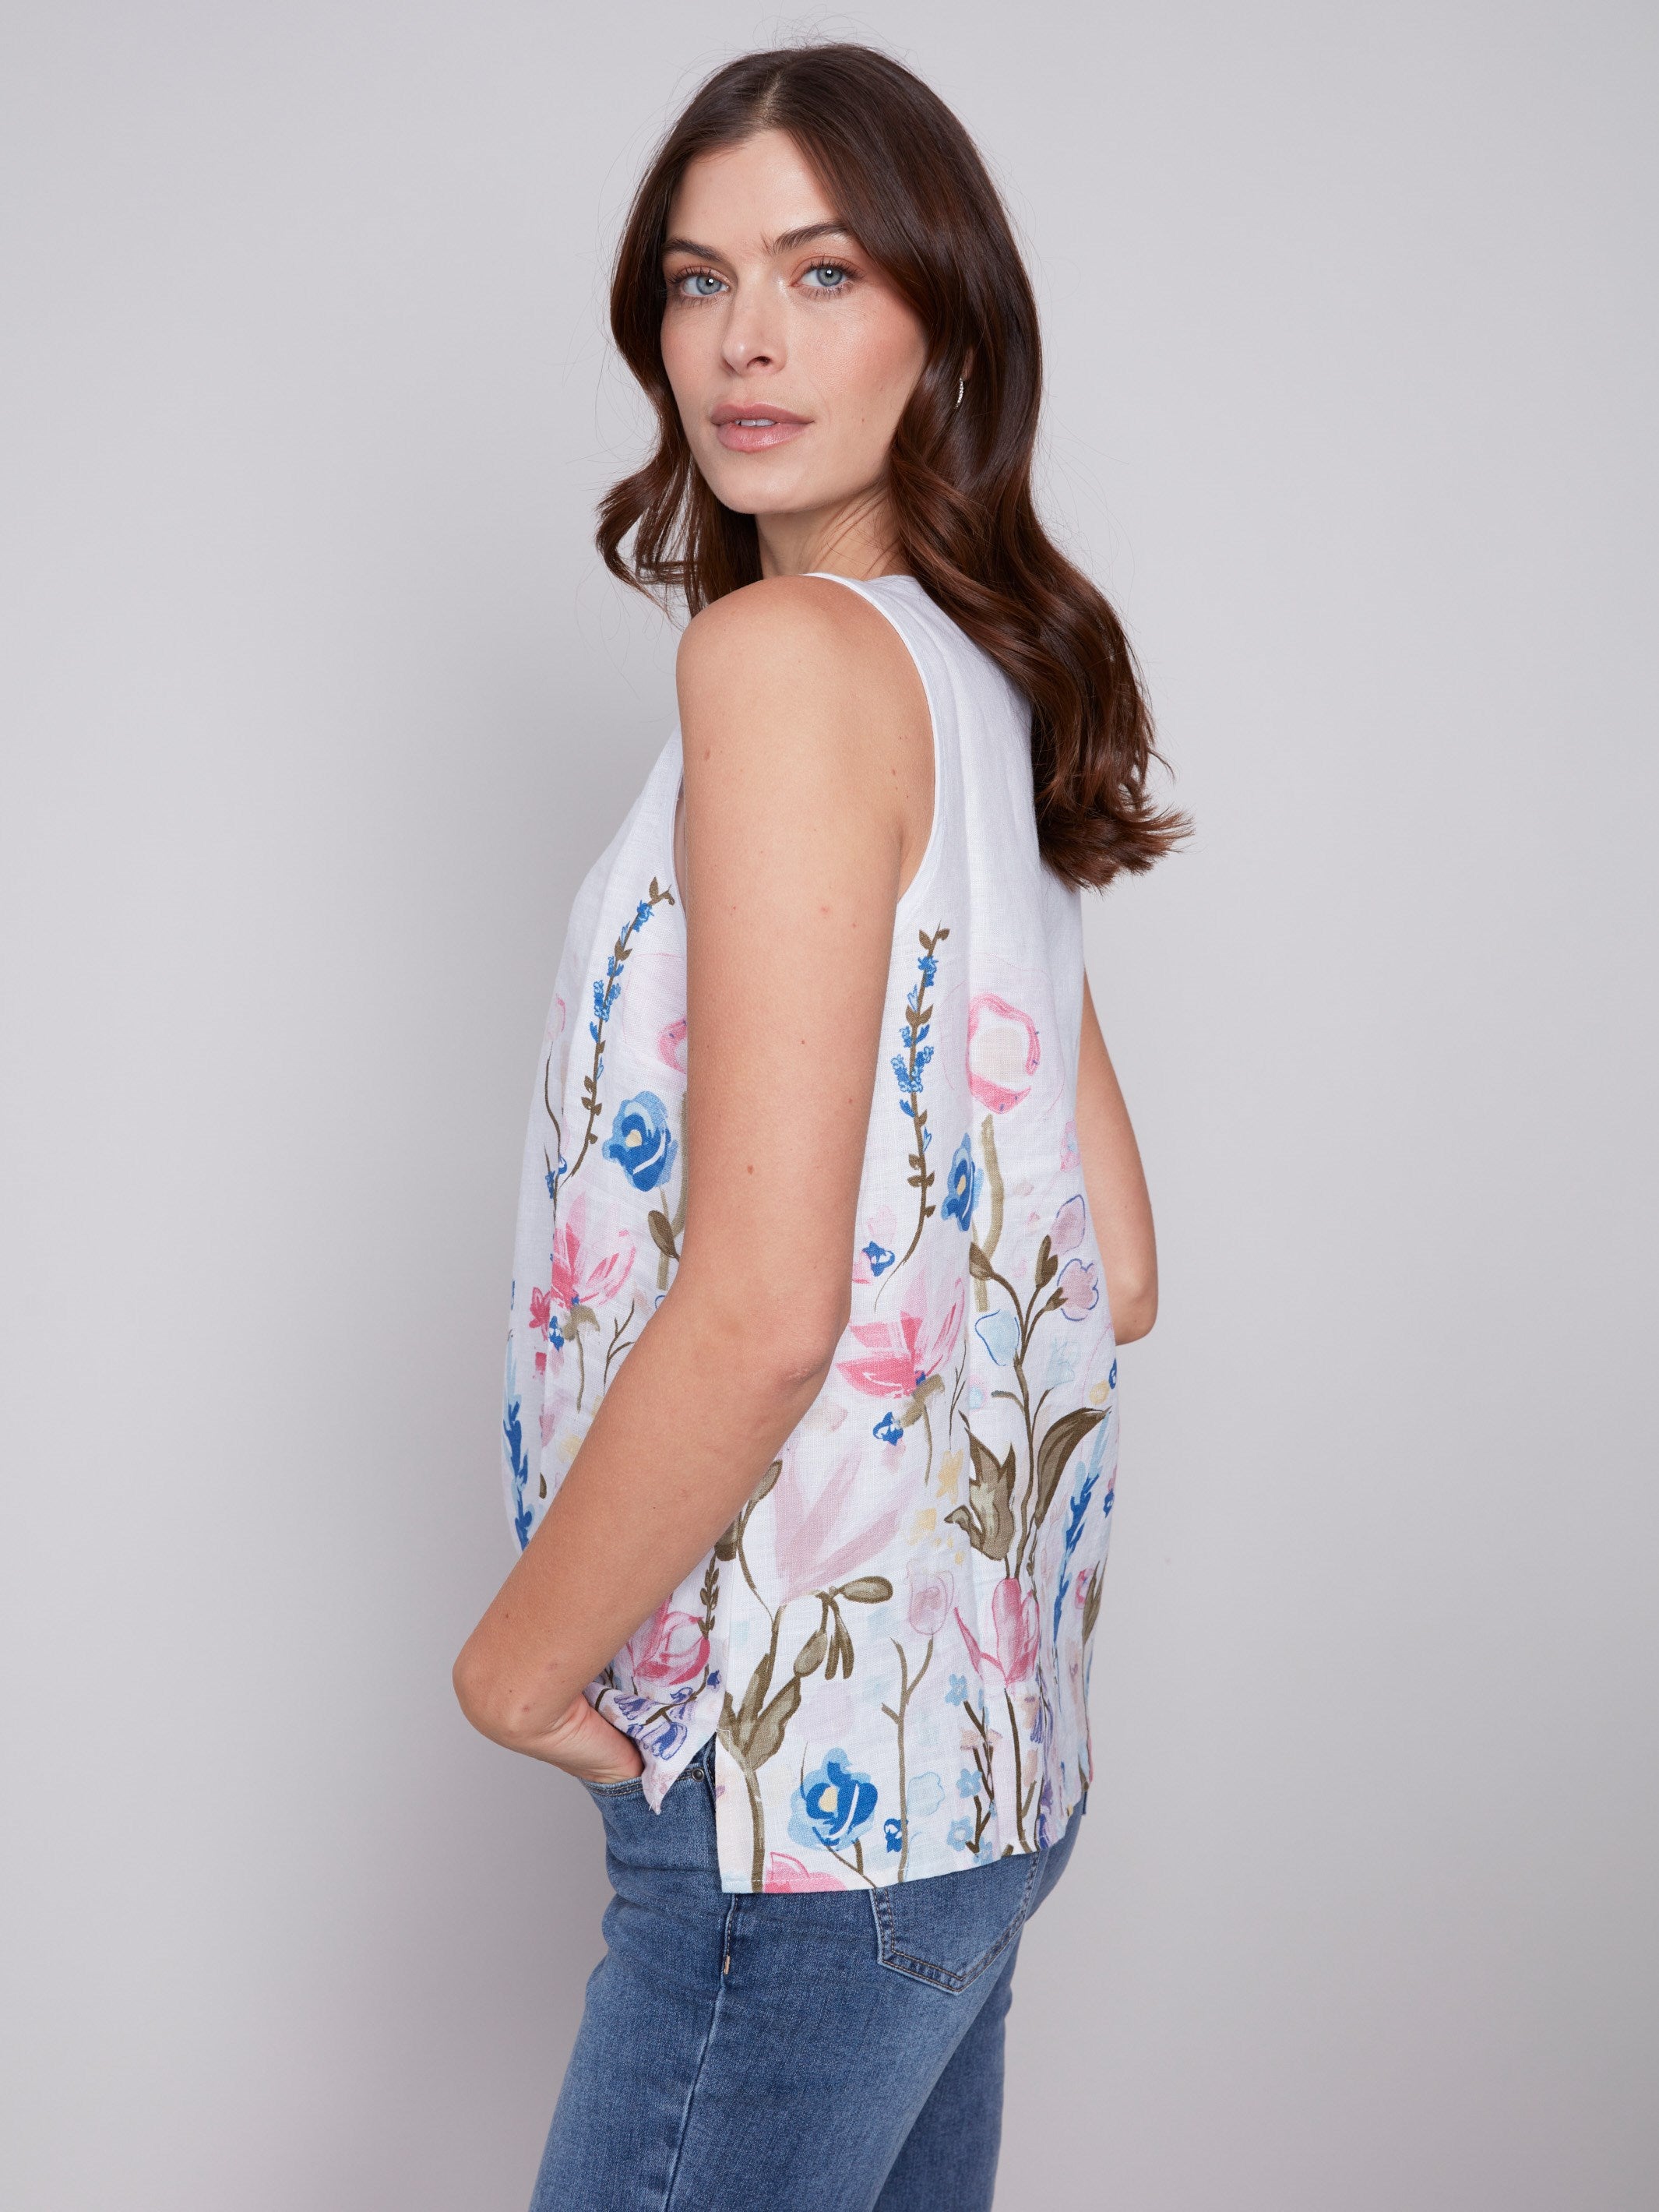 Sleeveless Floral Printed Linen Top - Pastel - Charlie B Collection Canada - Image 5